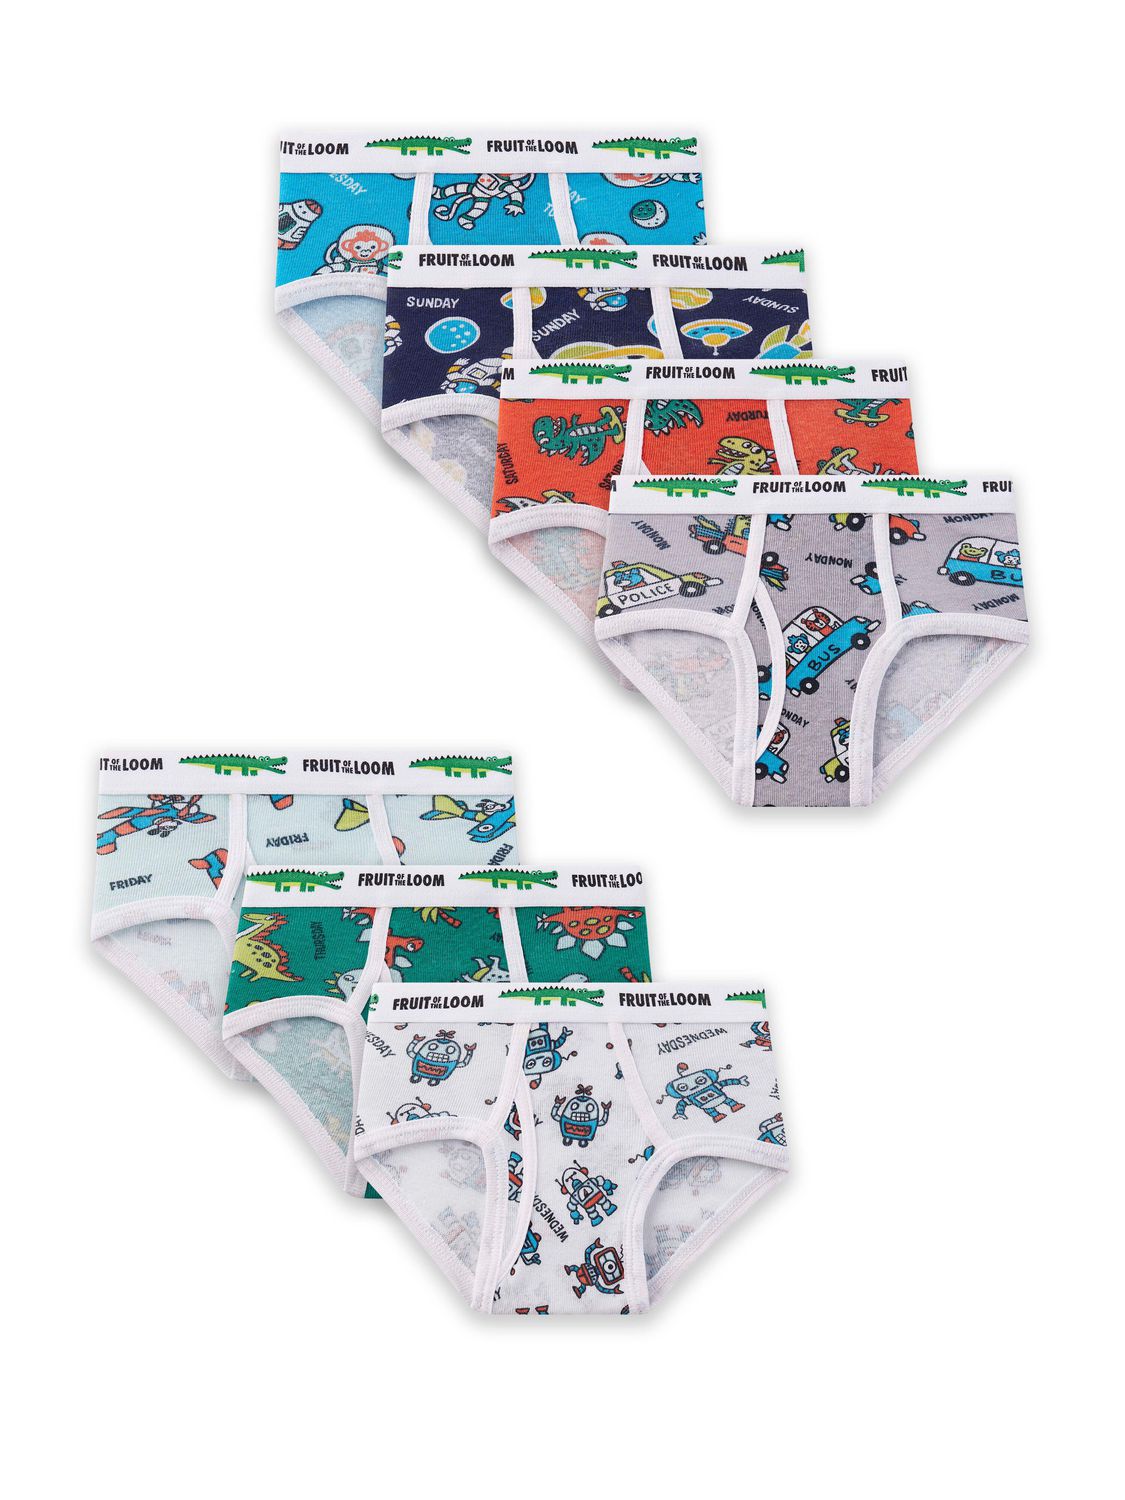 Fruit of the Loom Toddler Boys' Days of The Week Briefs, 7-Pack, Sizes  2T/3T, 4T/5T